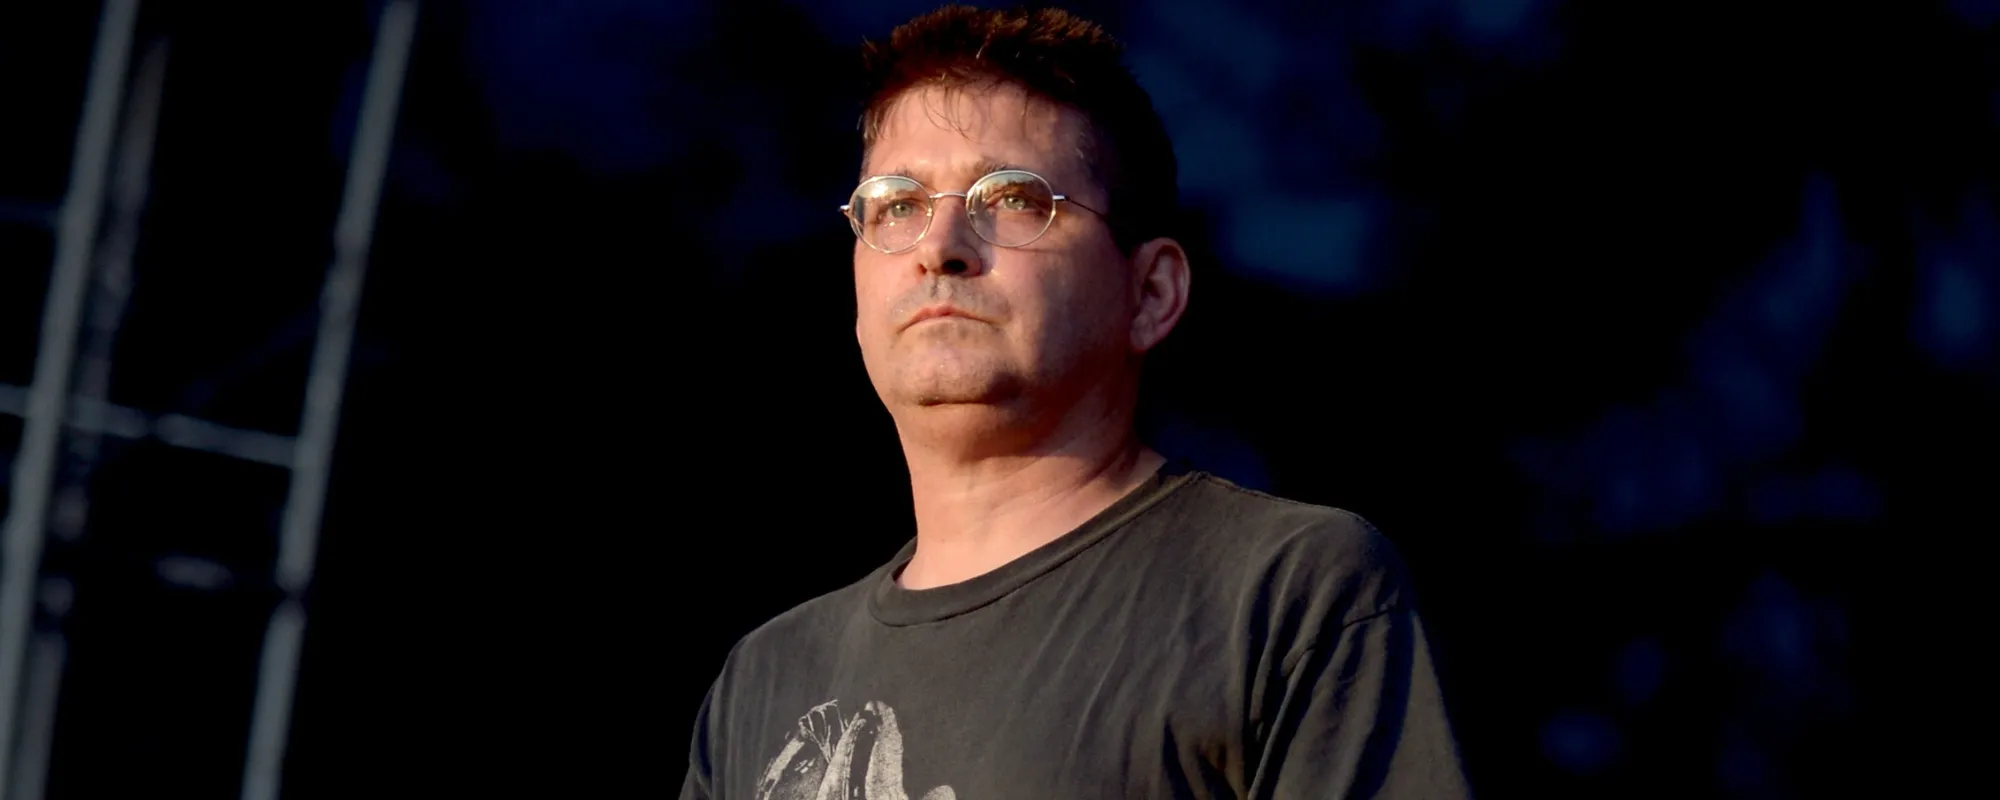 Iconic Indie Frontman and Engineer Steve Albini Dead at 61, Worked with Nirvana, PJ Harvey, and More